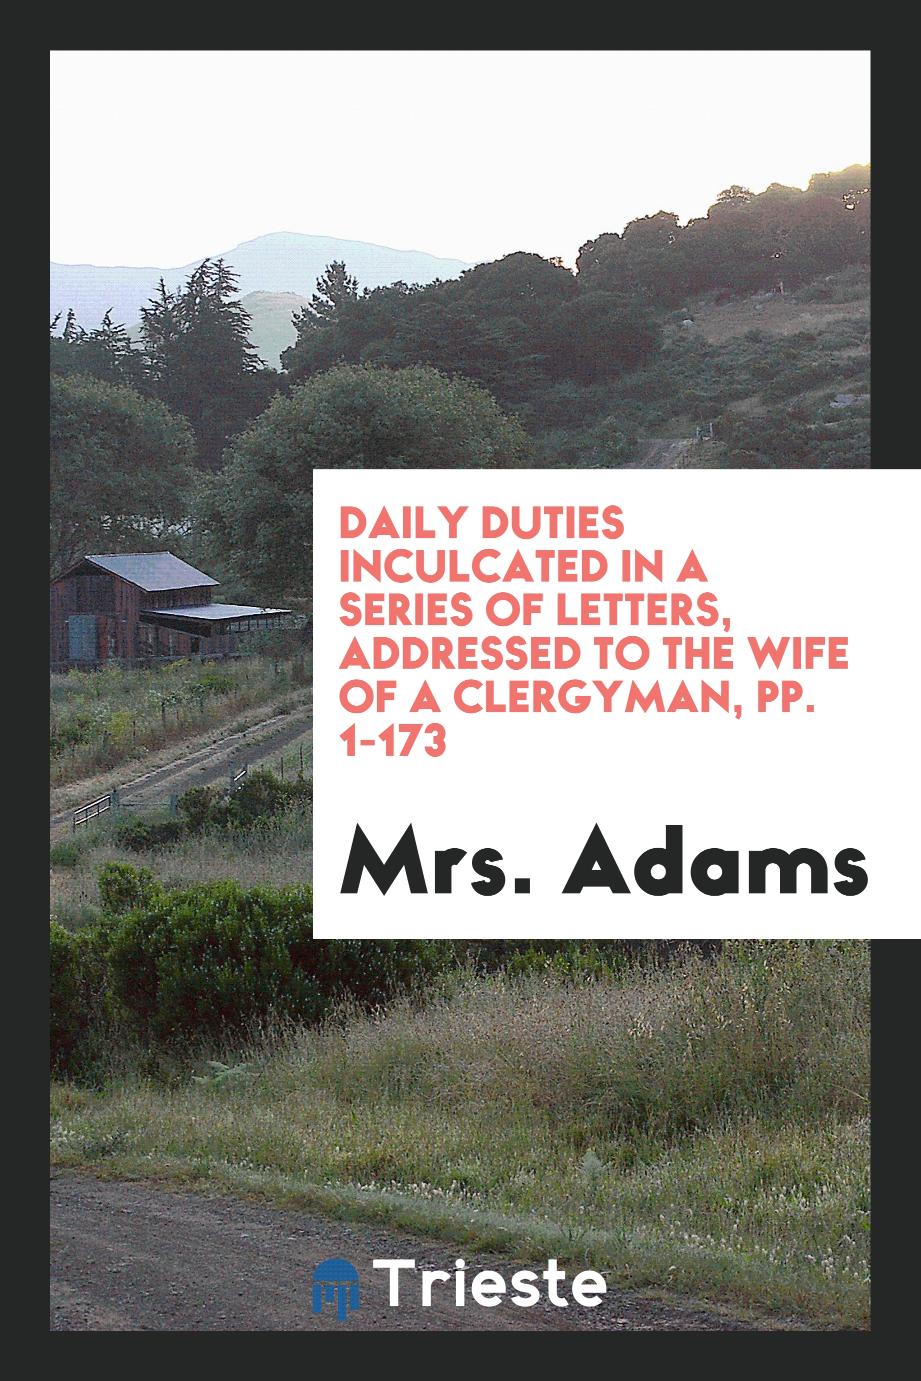 Daily Duties Inculcated in a Series of Letters, Addressed to the Wife of a Clergyman, pp. 1-173